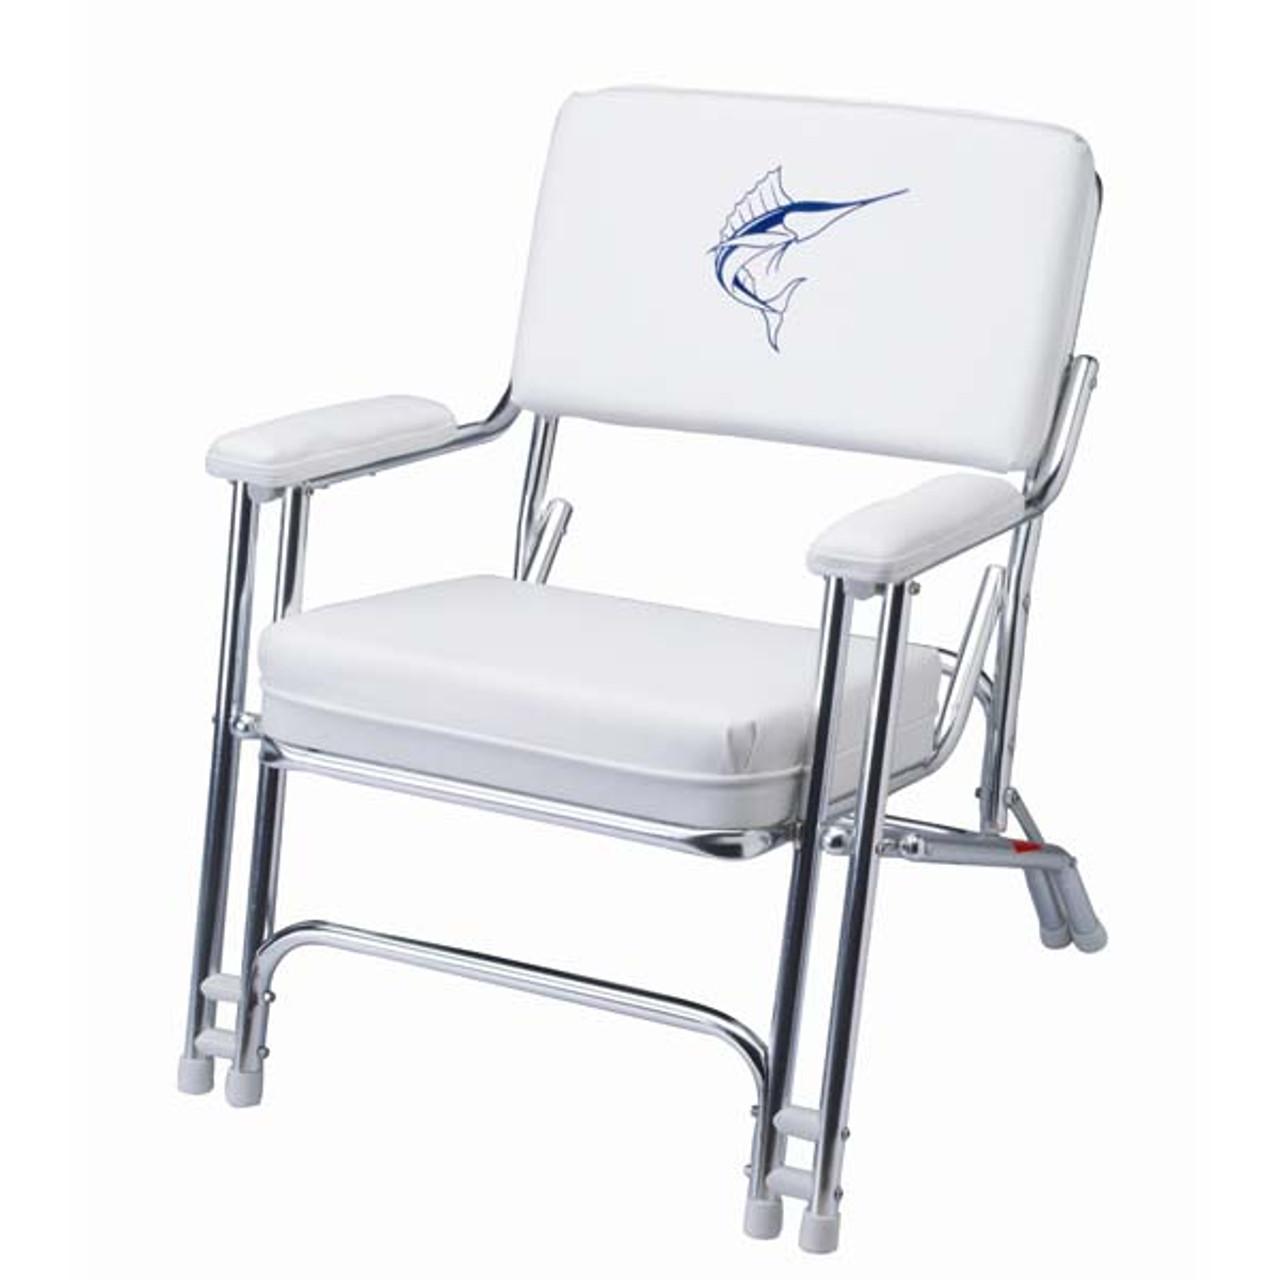 Garelick Mariner Folding Deck Chair With Sewn Cushions